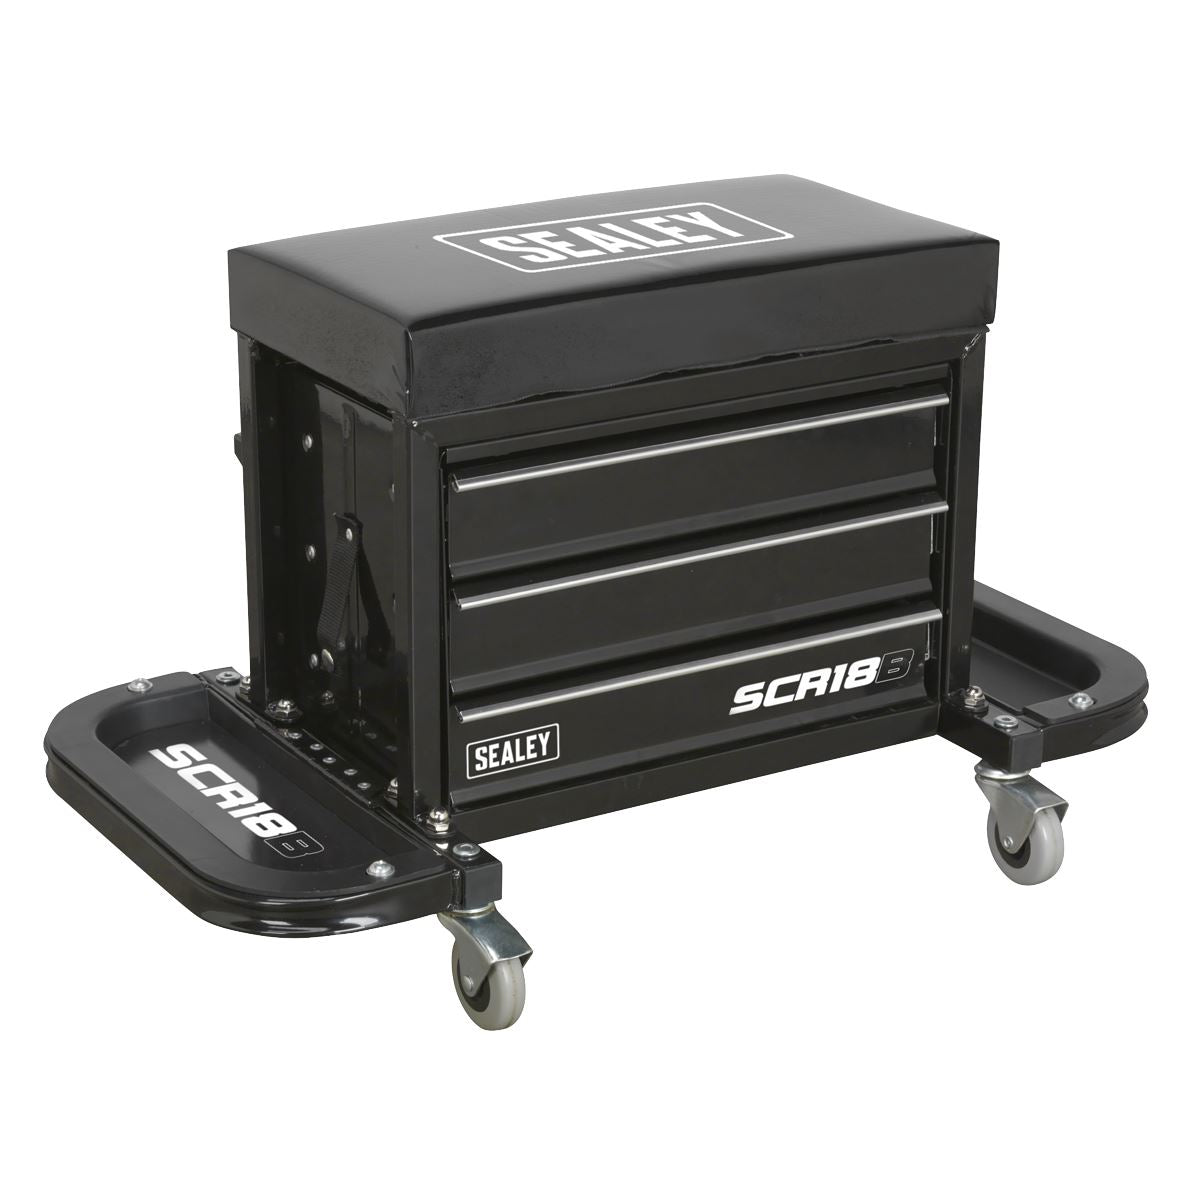 Sealey Mechanics Rolling Utility Seat and Toolbox with Drawers Black